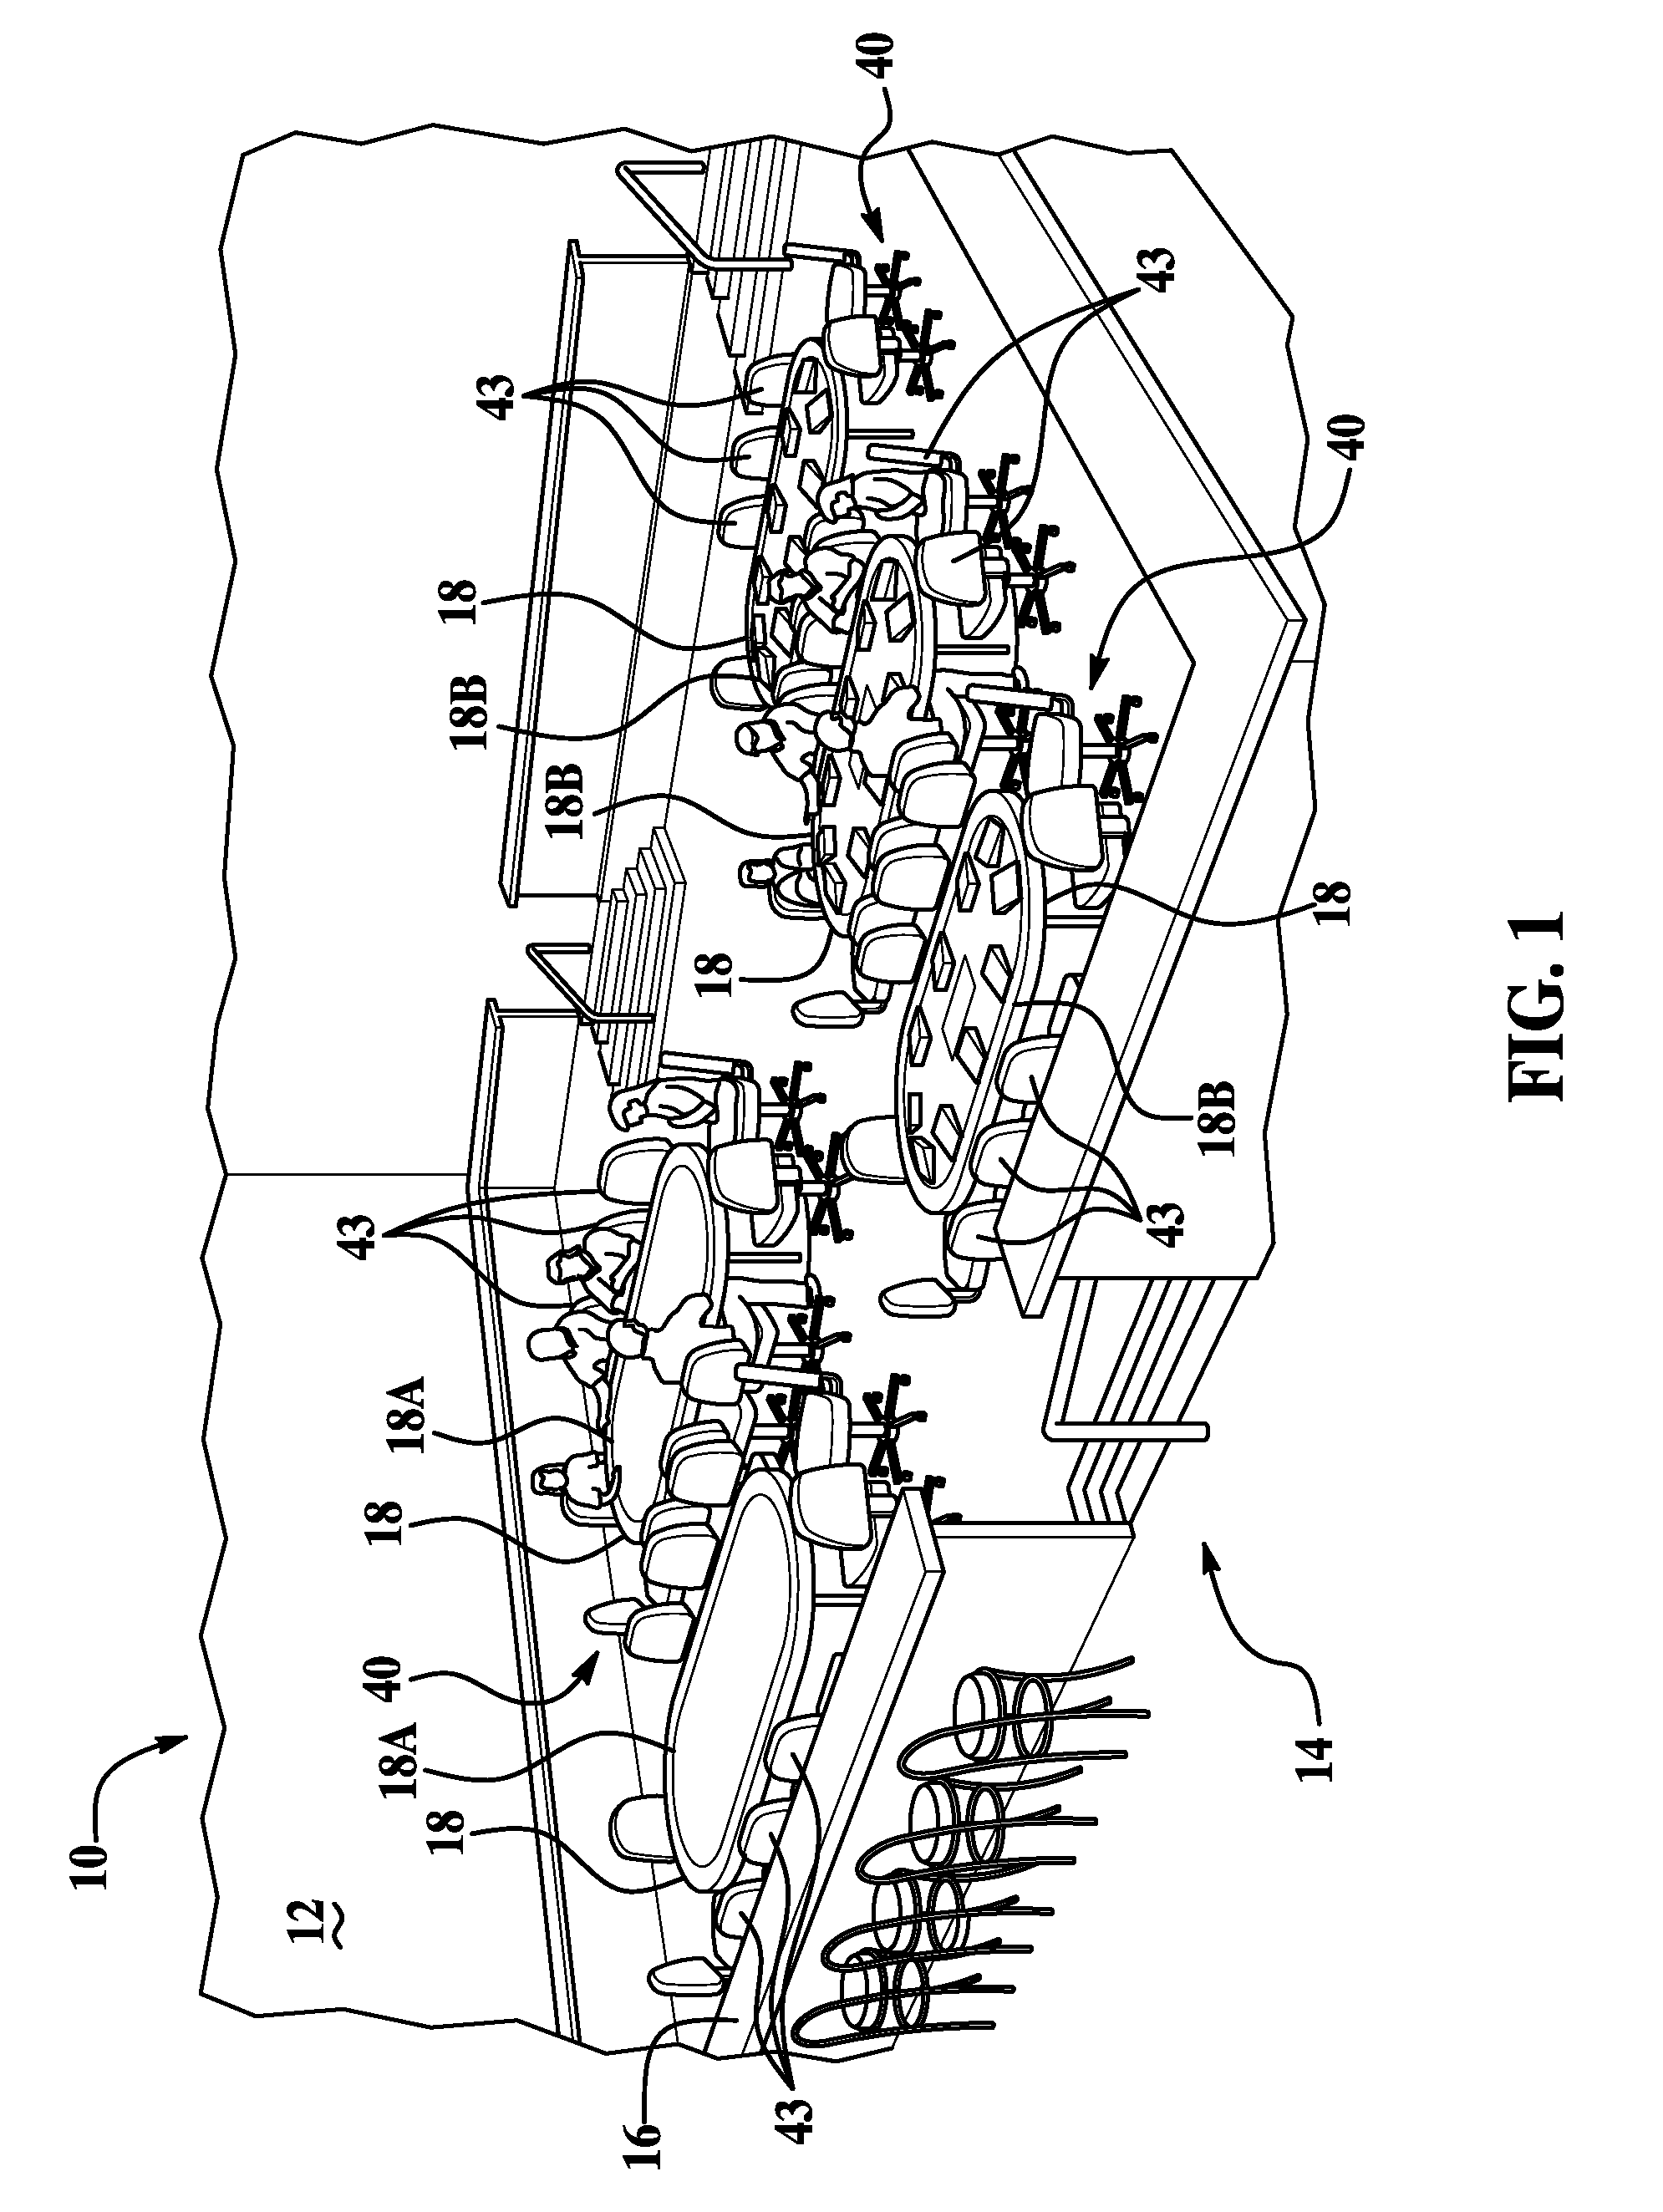 Method of reserving a seat at a gaming table